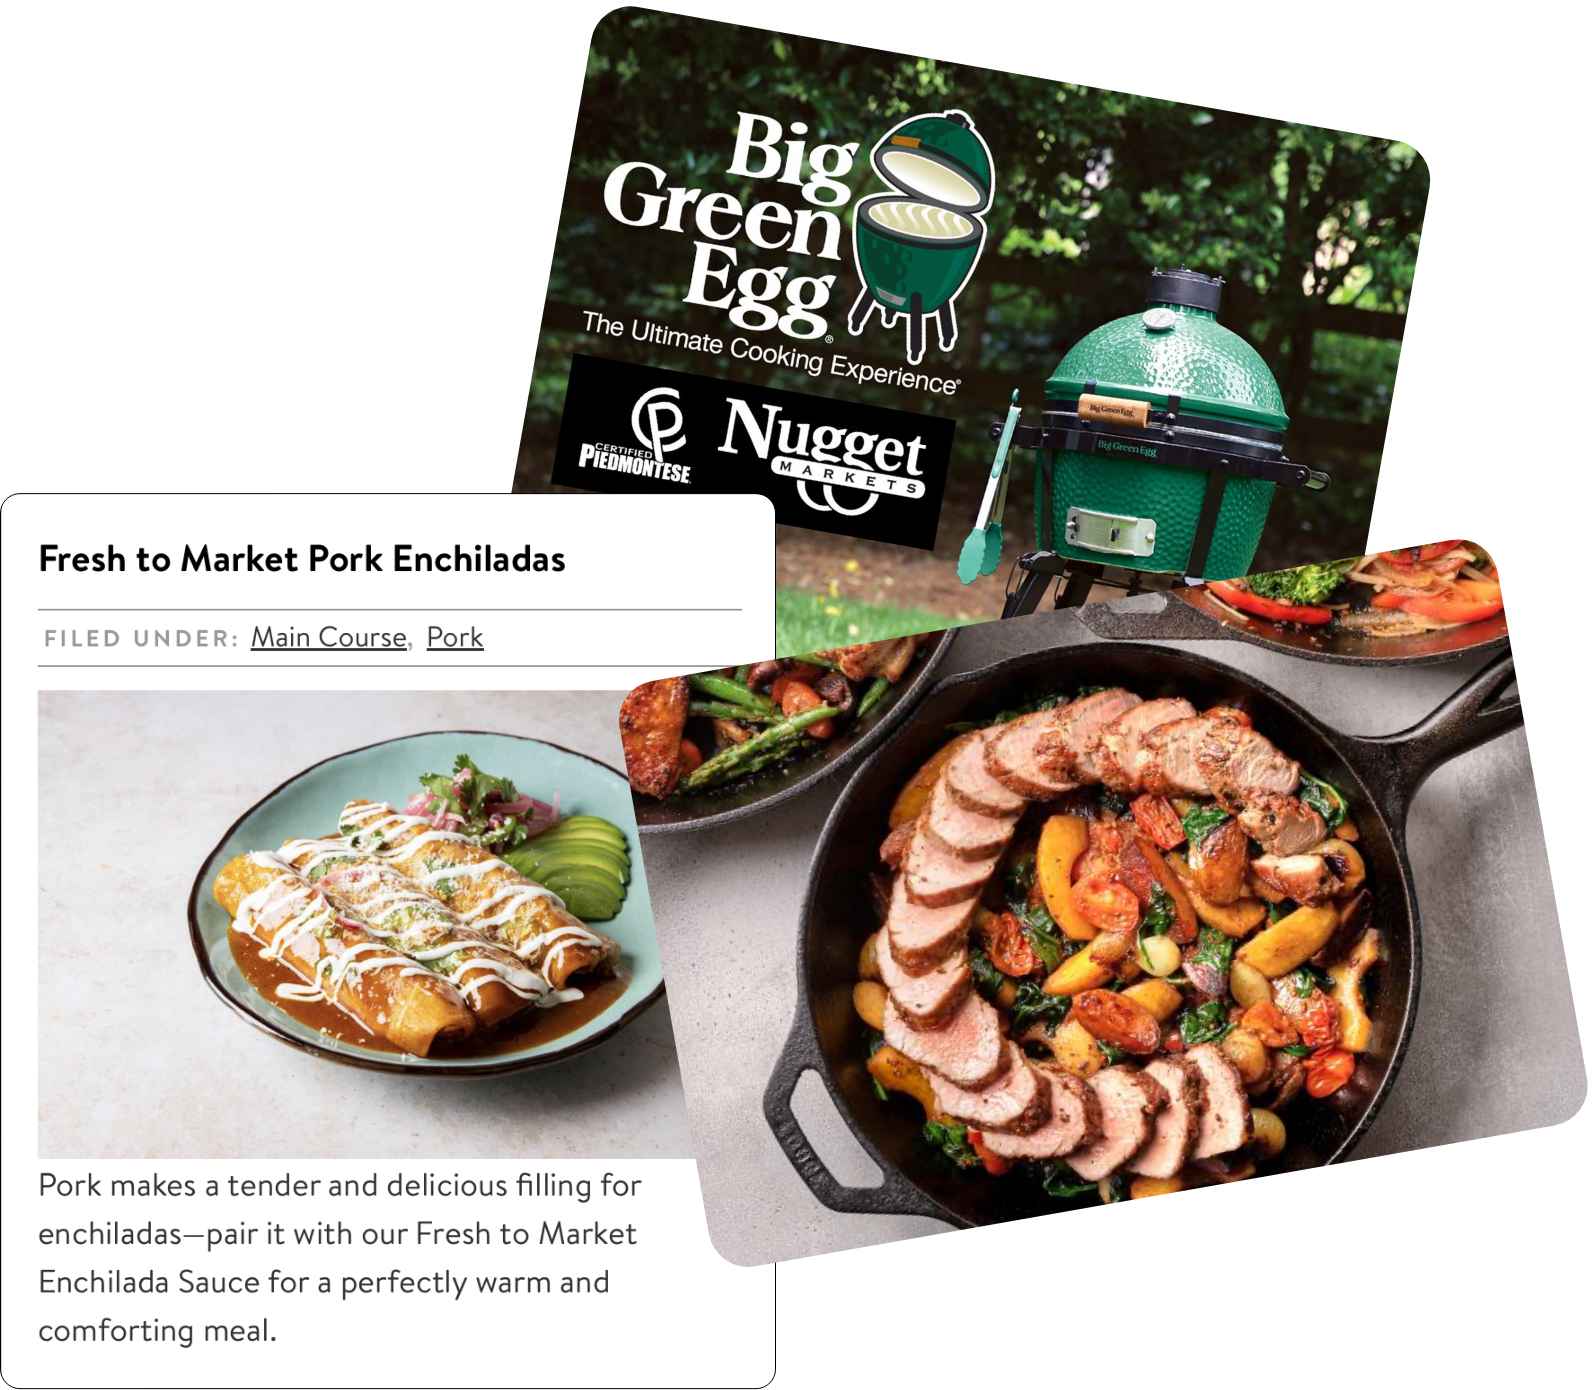 A collage of images featuring a Green Egg smoker, pork tenderloins in an iron skillet, and a recipe card featuring encheladas